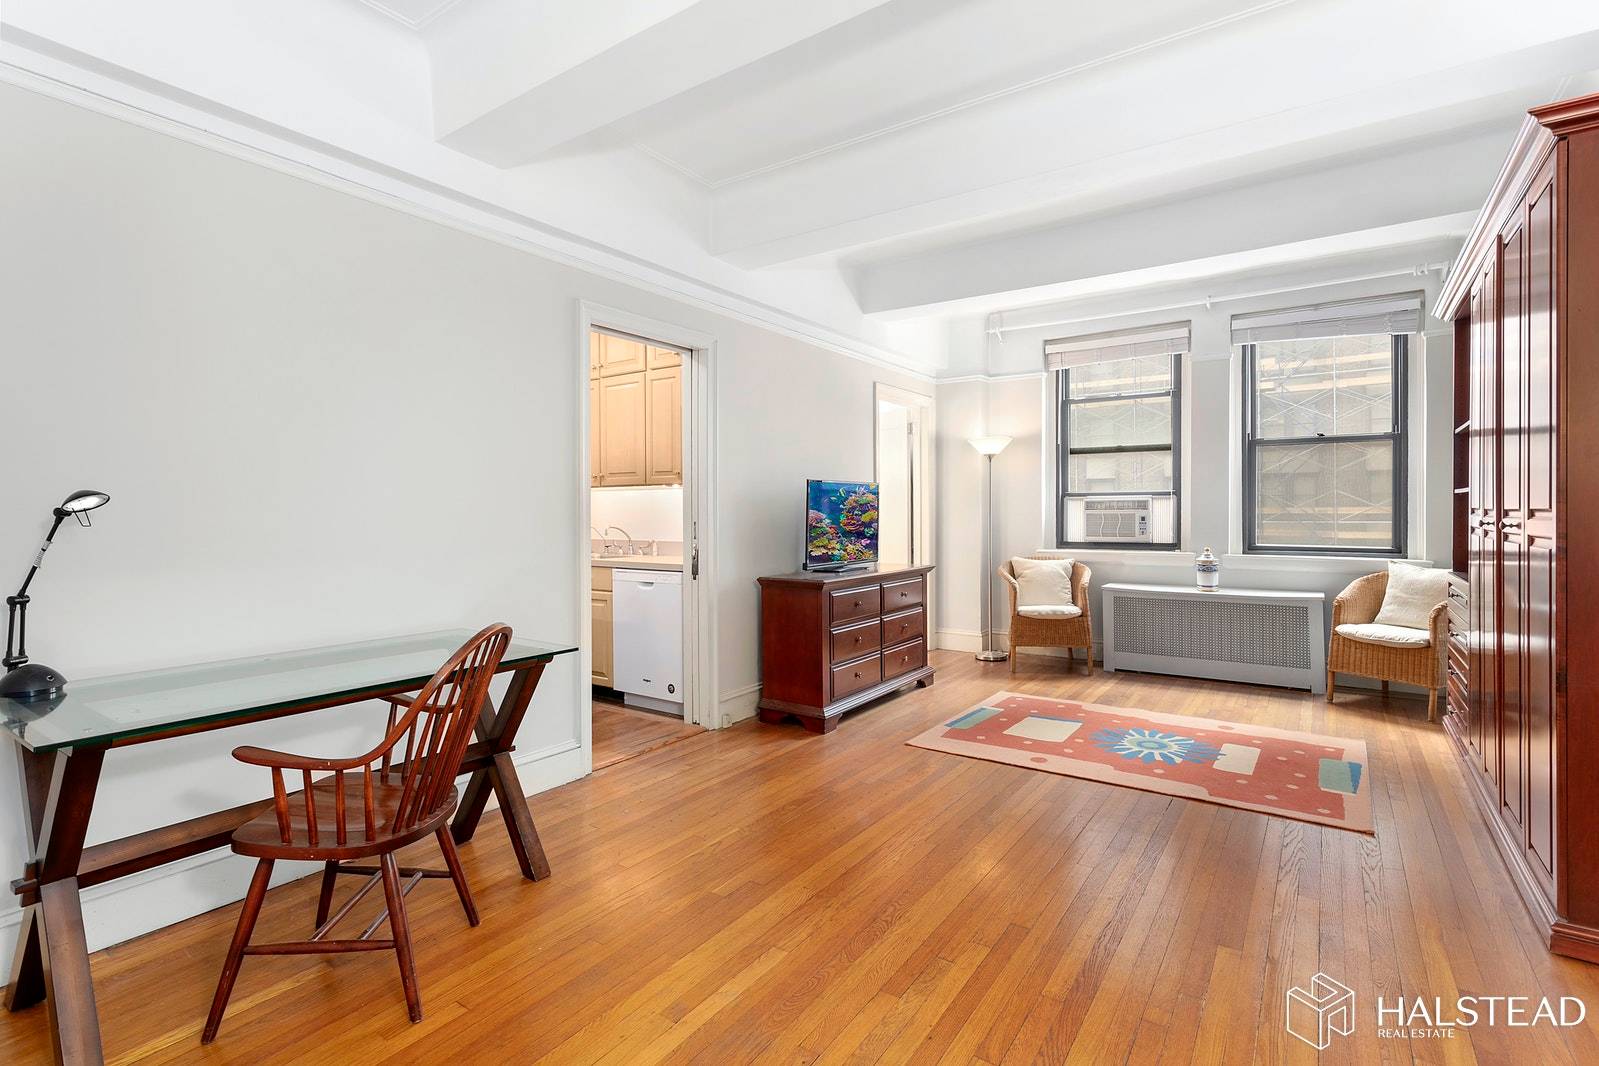 Carnegie Plaza is a full service lifestyle with live in super and central laundry room amongst this vibrant Midtown location with top restaurants, shopping, theater, and museums including Central Park, ...